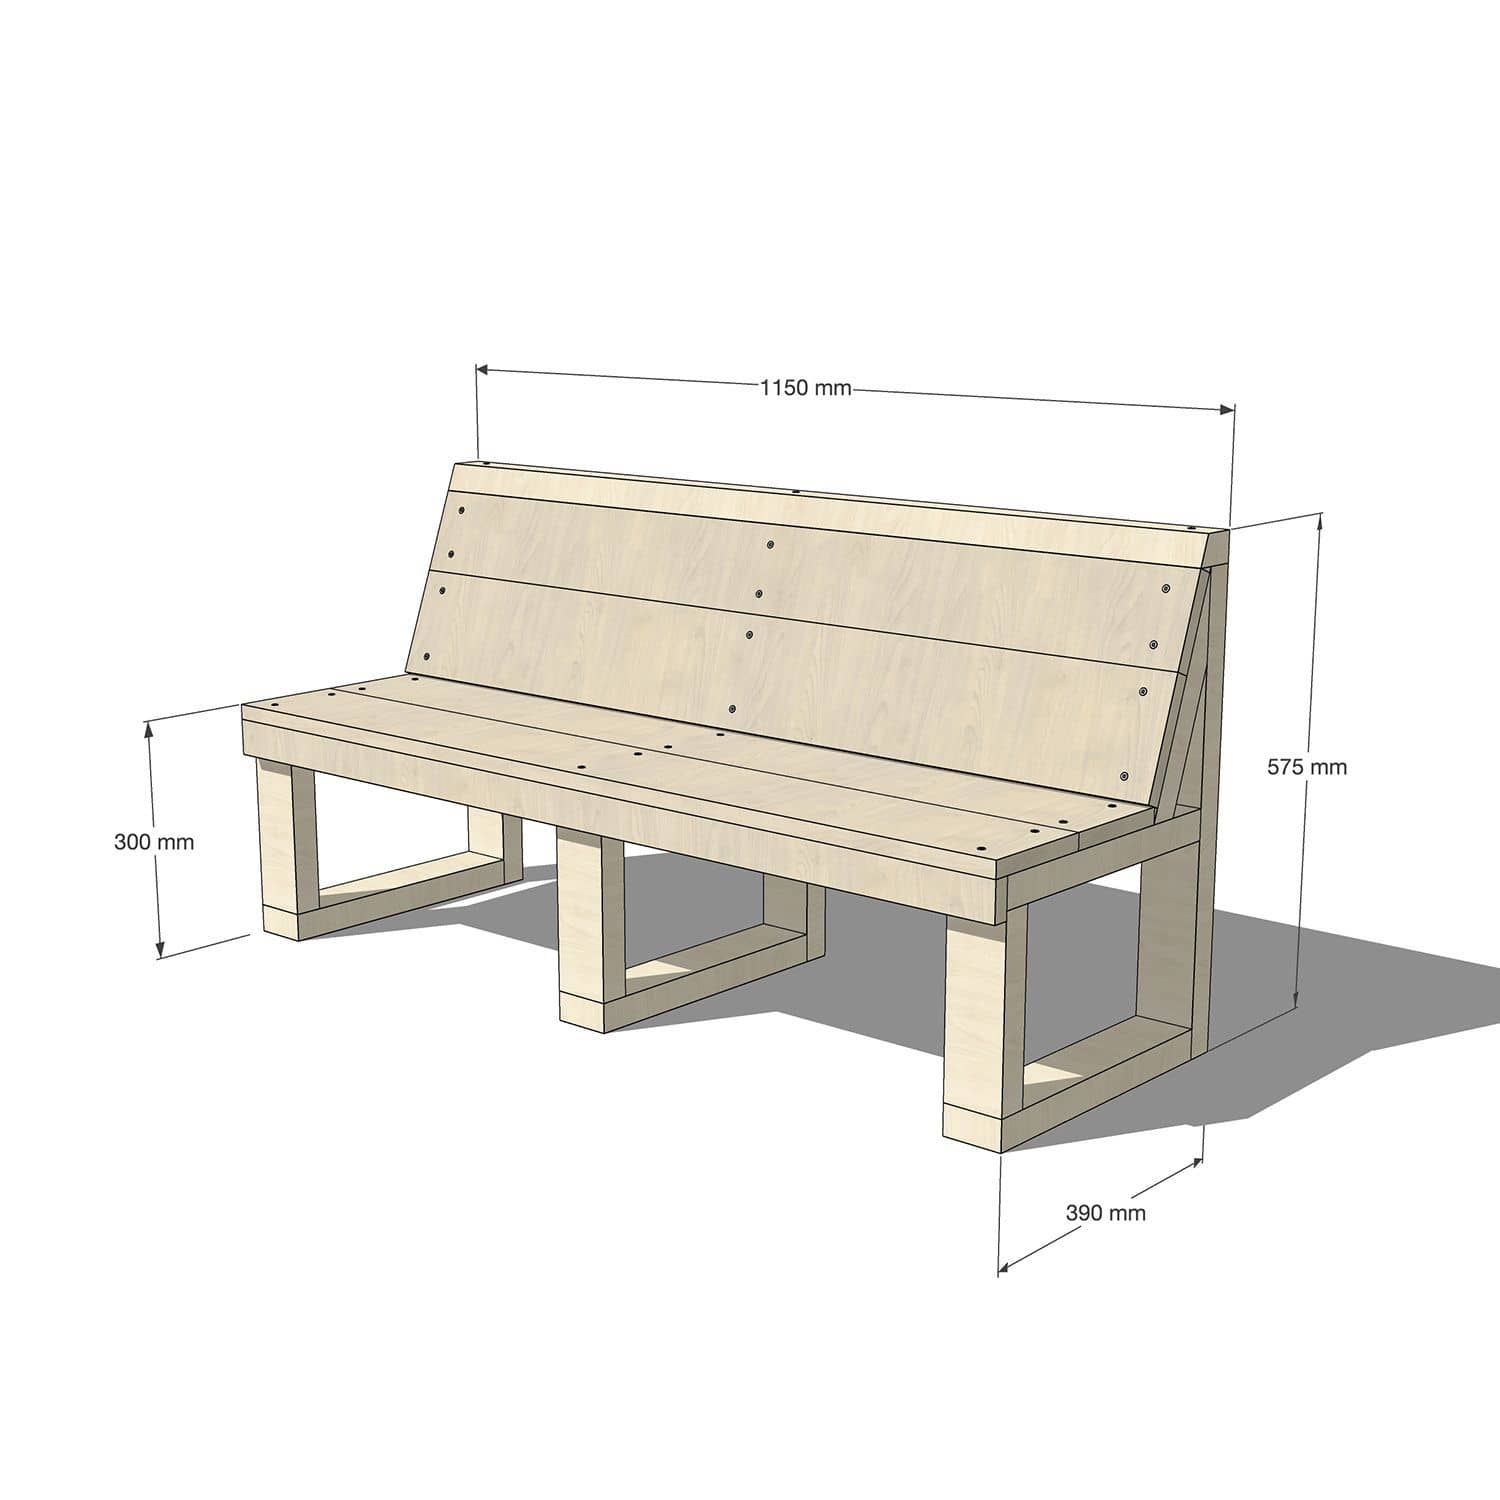 Wooden bench seat with back with dimensions